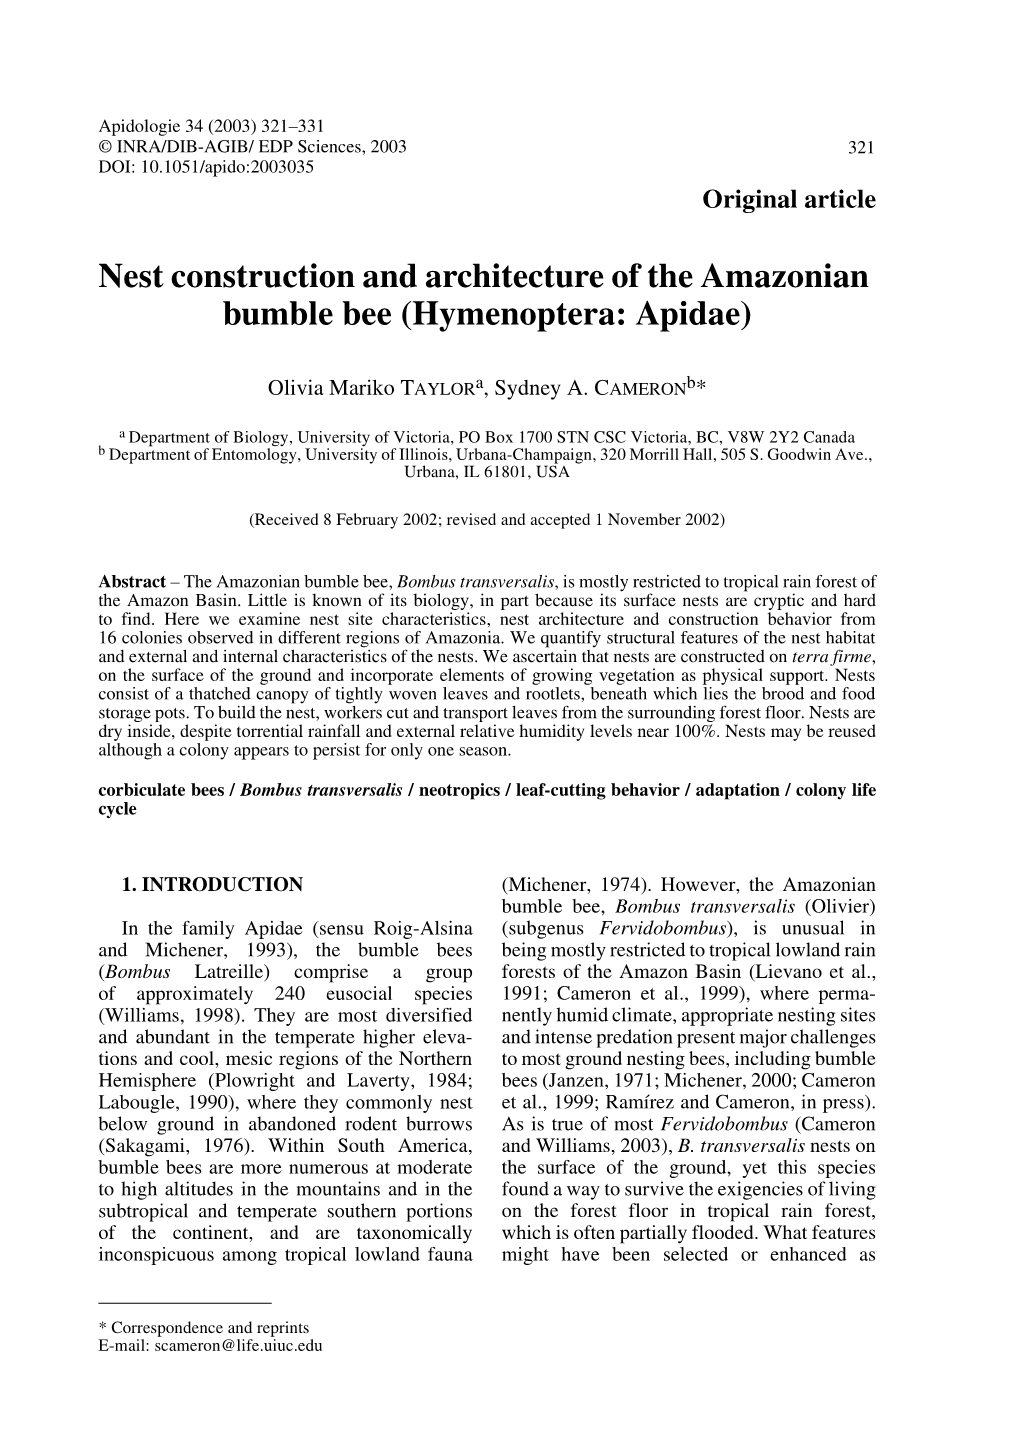 Nest Construction and Architecture of the Amazonian Bumble Bee (Hymenoptera: Apidae)